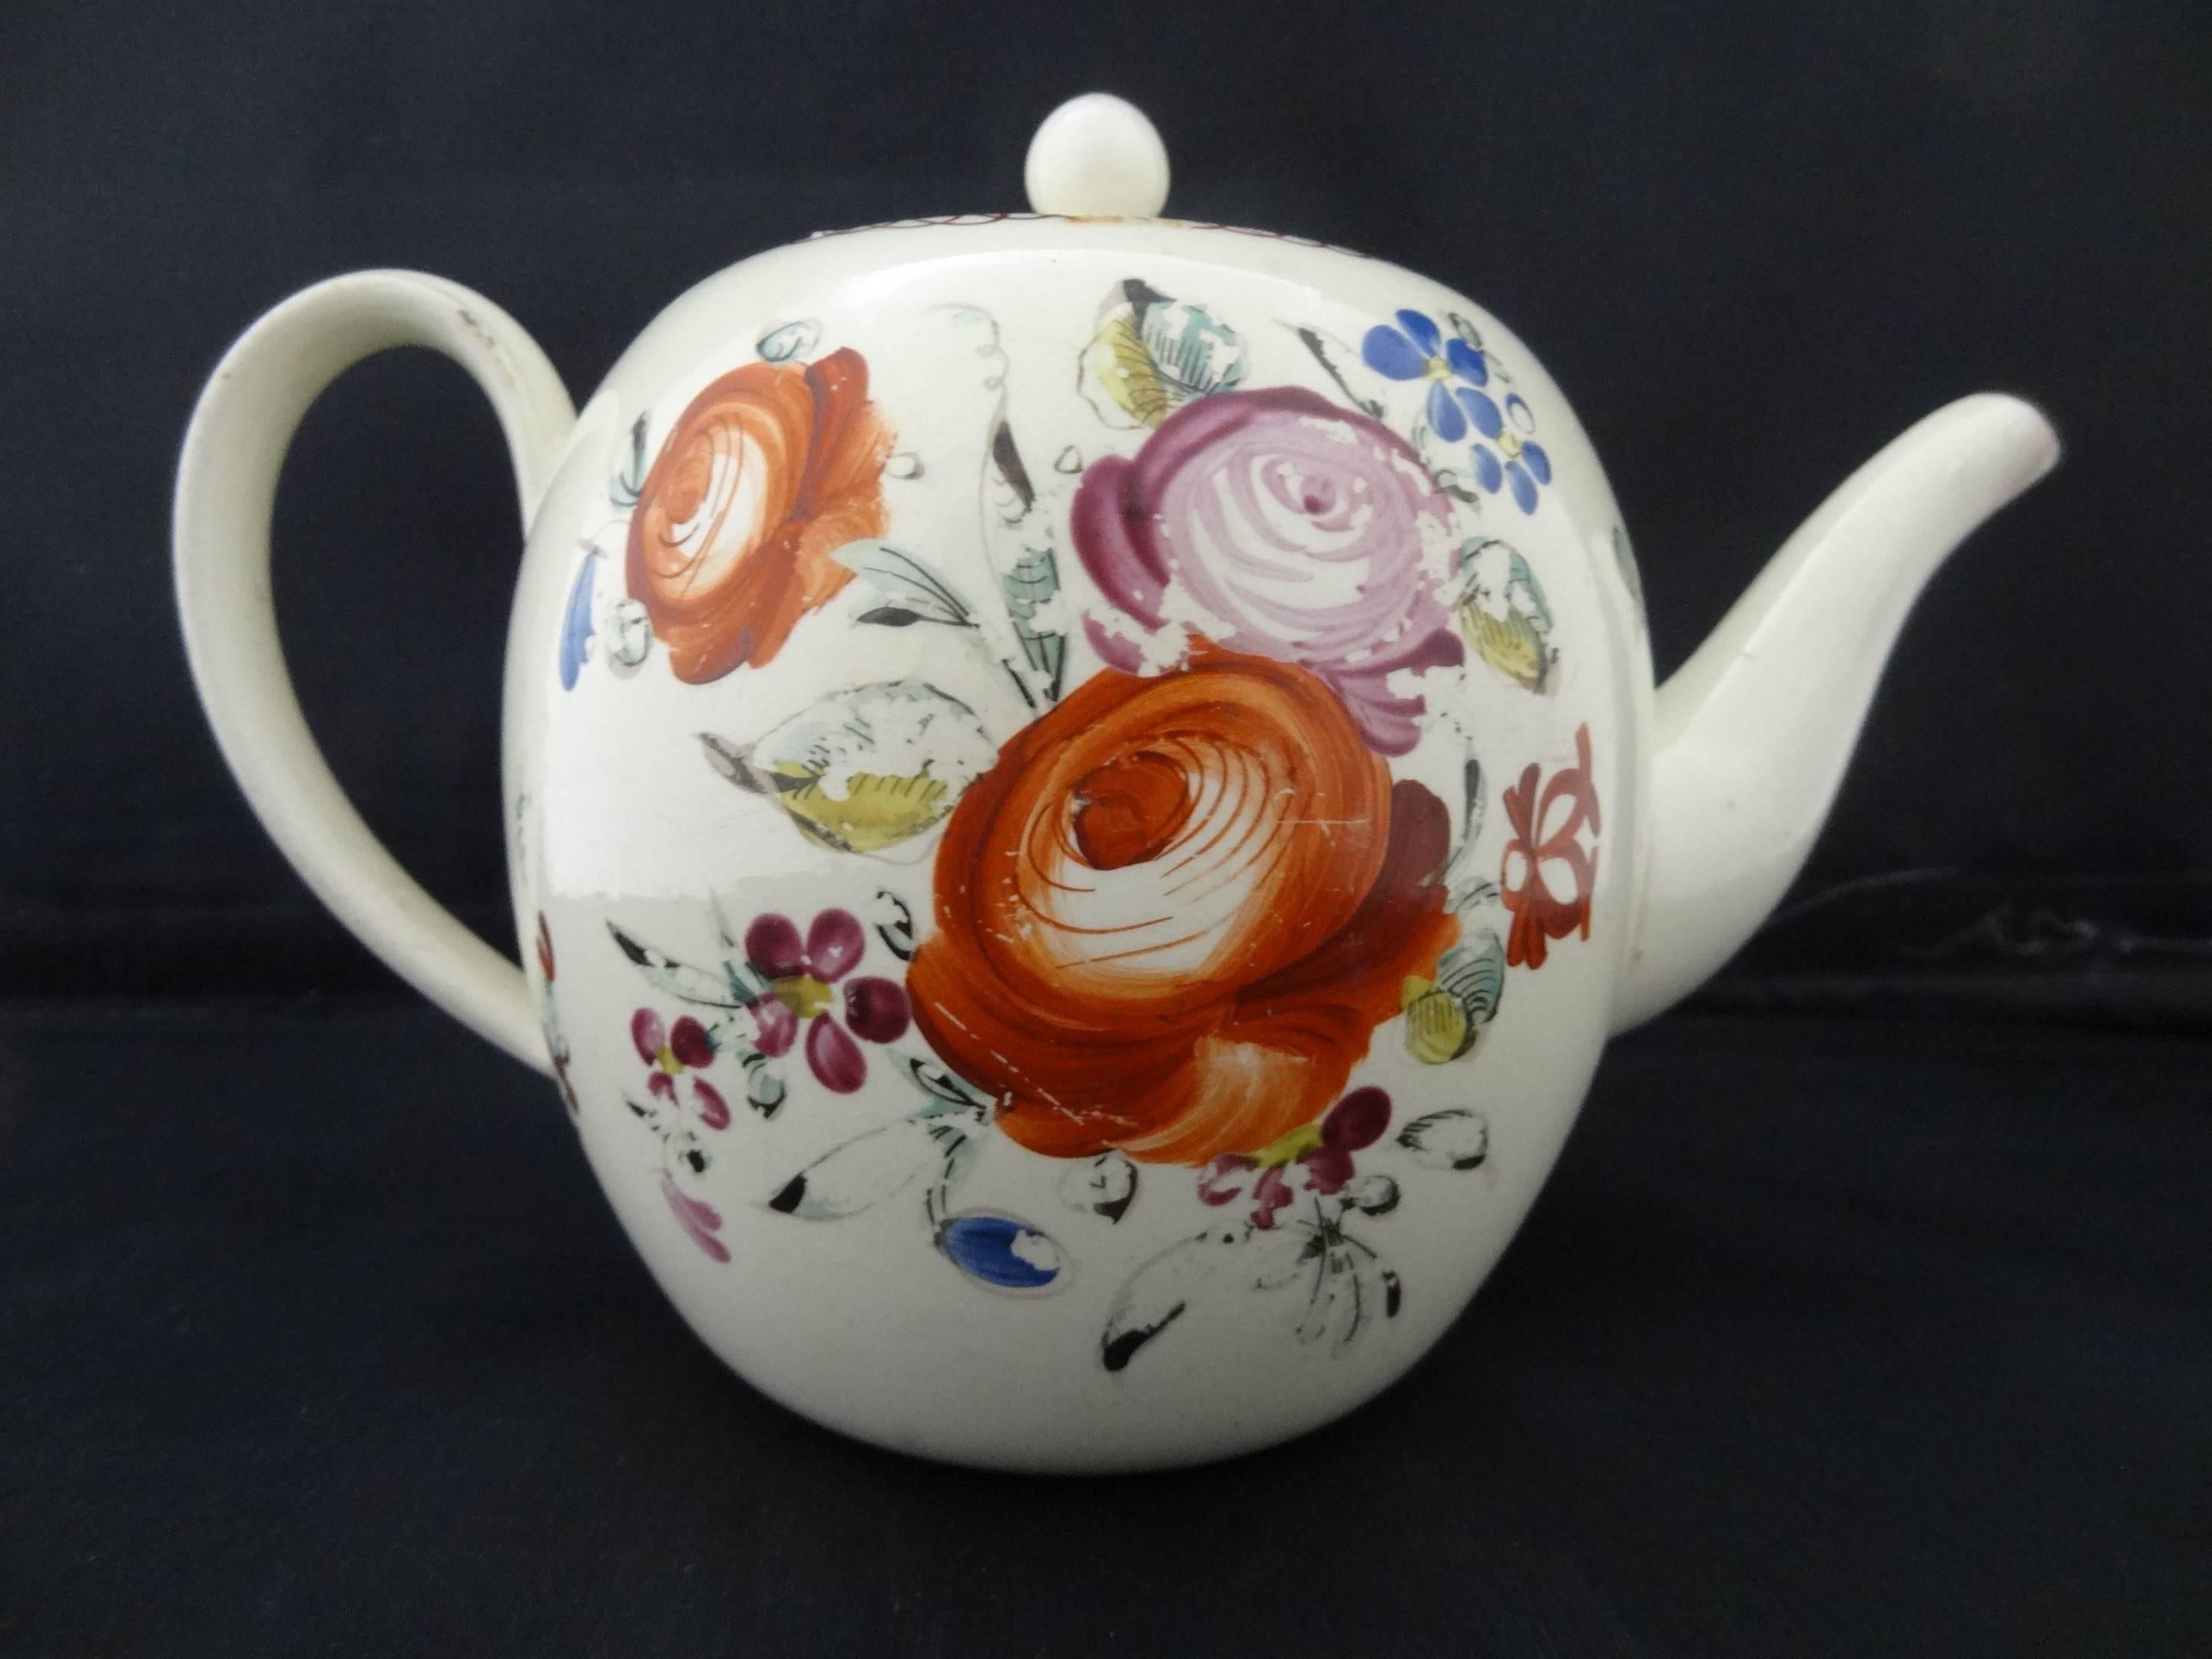 A beautiful example of a creamware teapot from Leeds.